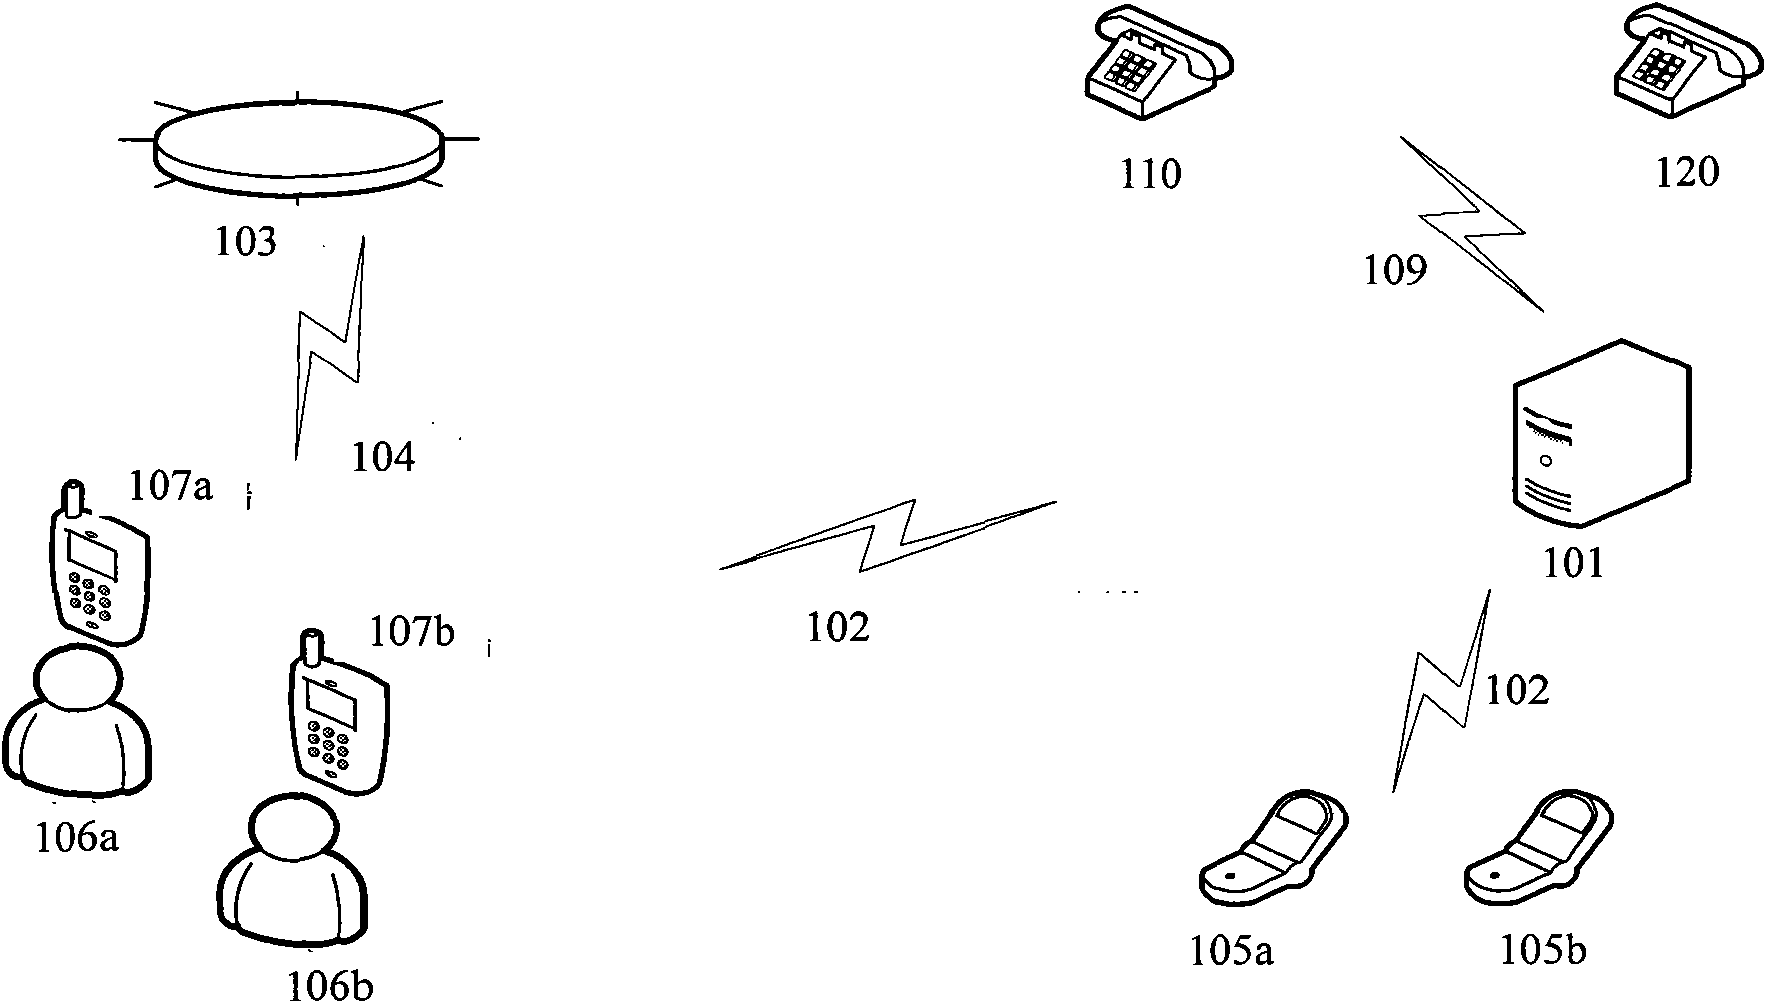 Wireless intelligent communications terminal, system and method for monitoring the old/child